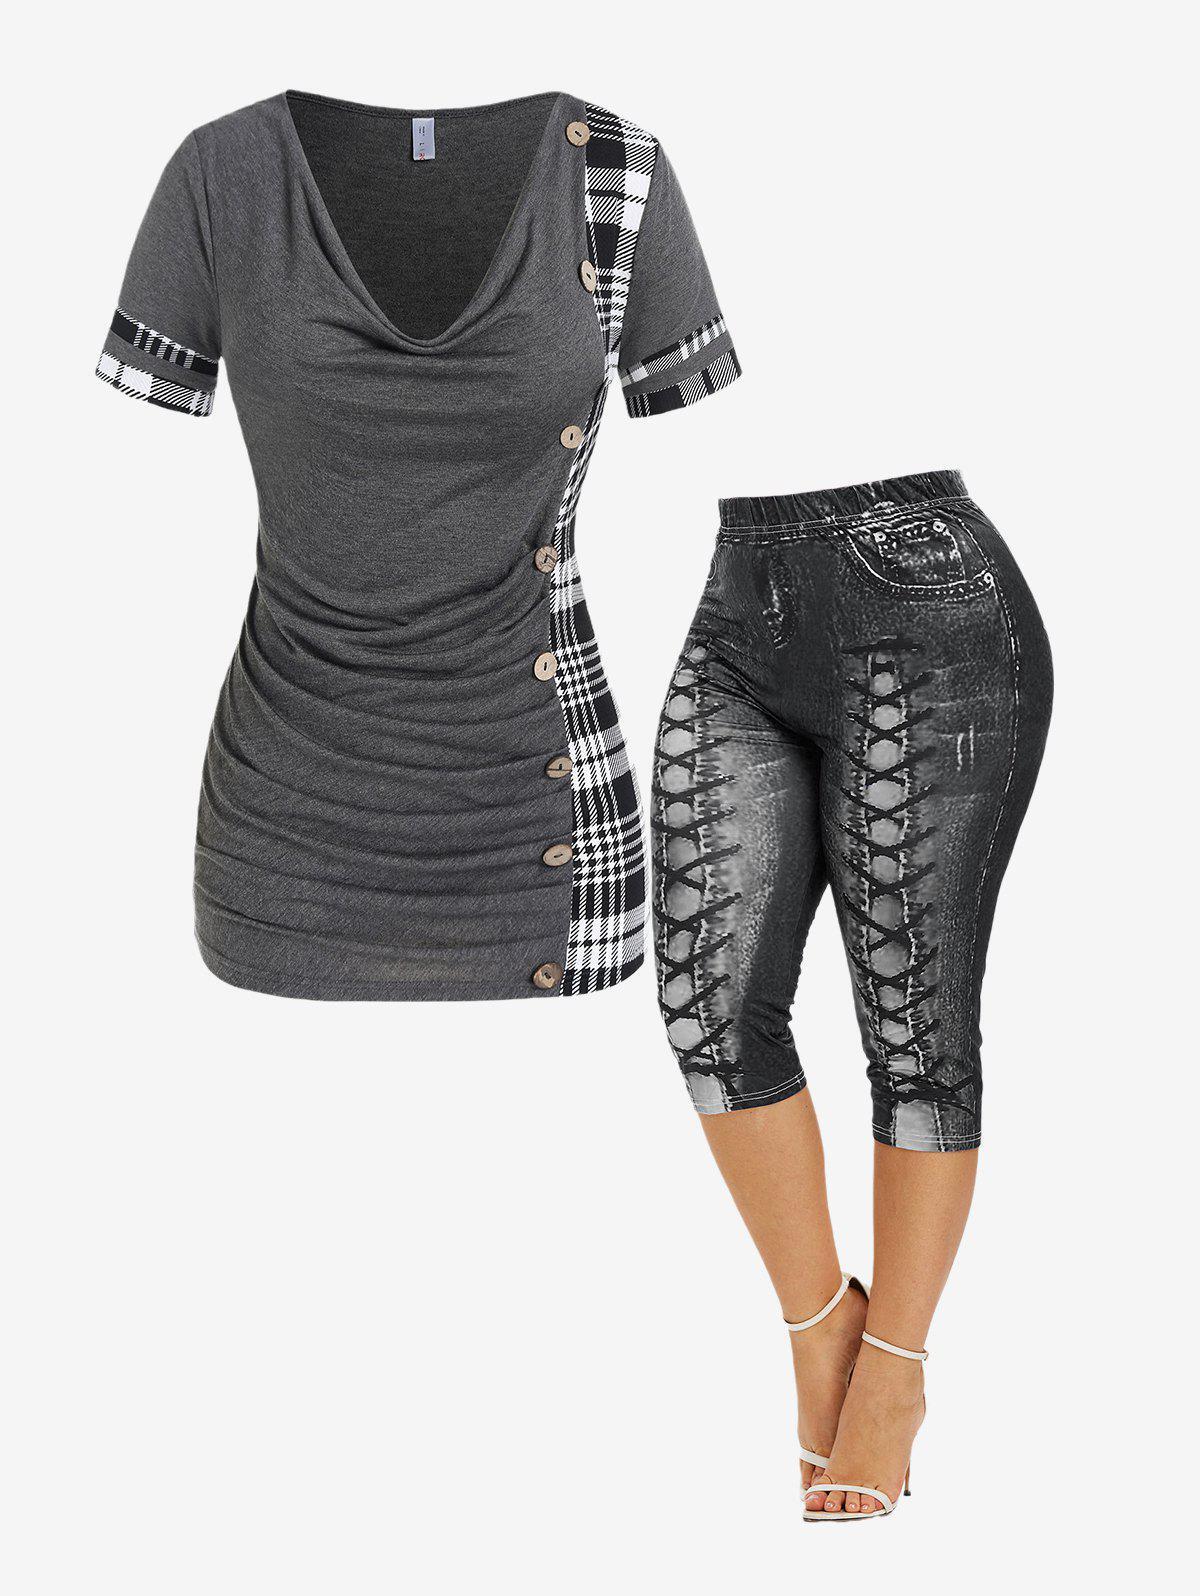 Plaid Cowl Neck Ruched Tee and 3D Lace Up Jean Print Leggings with Buttons Plus Size Outfit